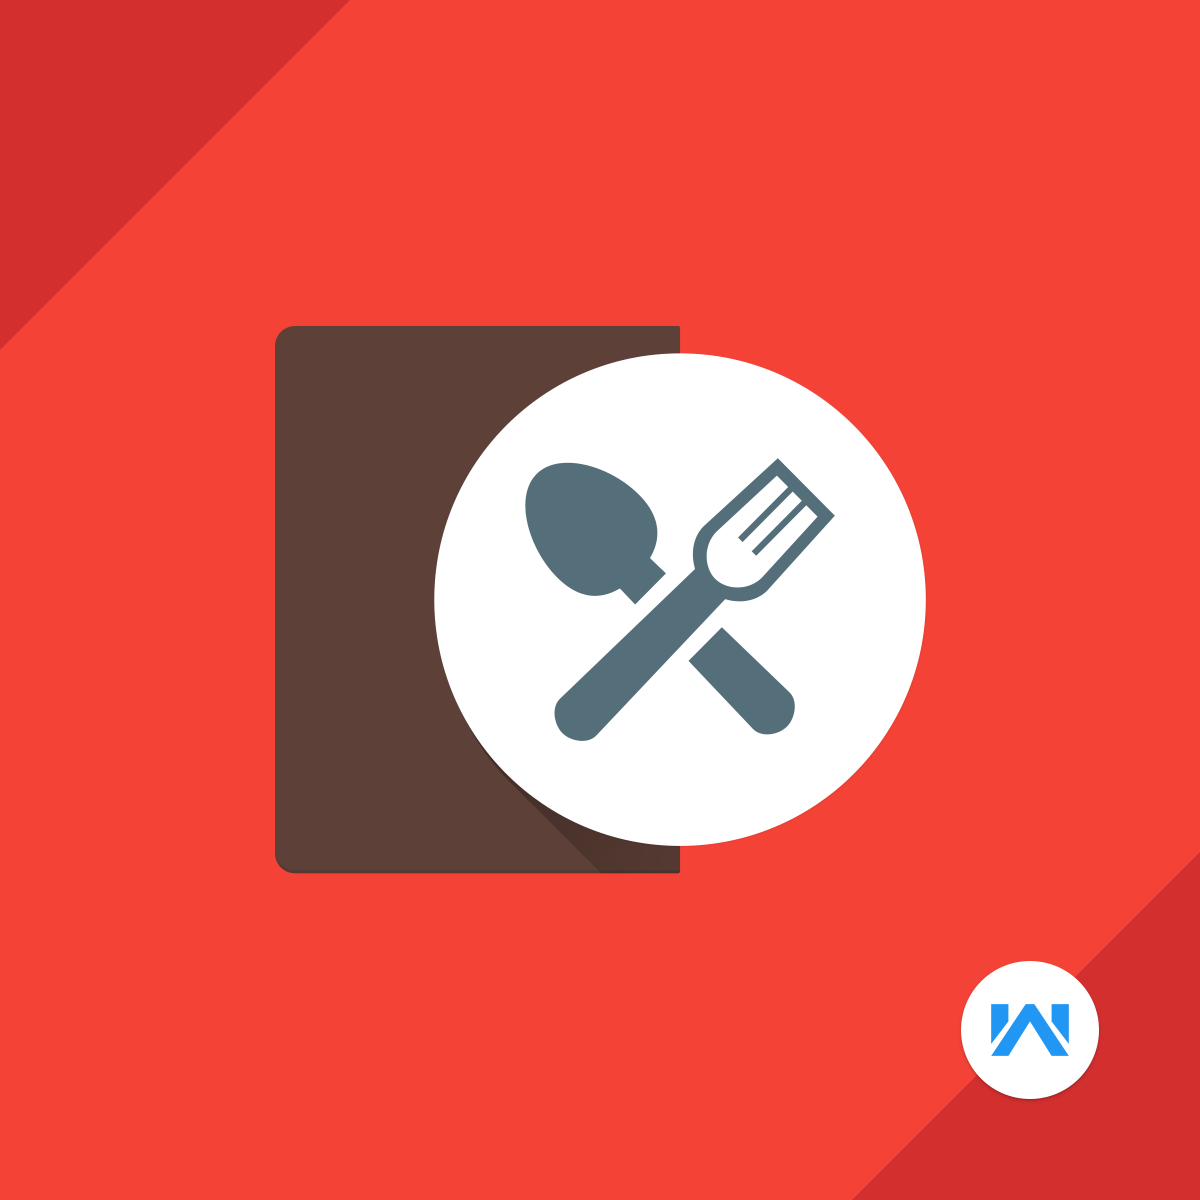 Hire Shopify Experts to integrate Restaurant Table Management app into a Shopify store